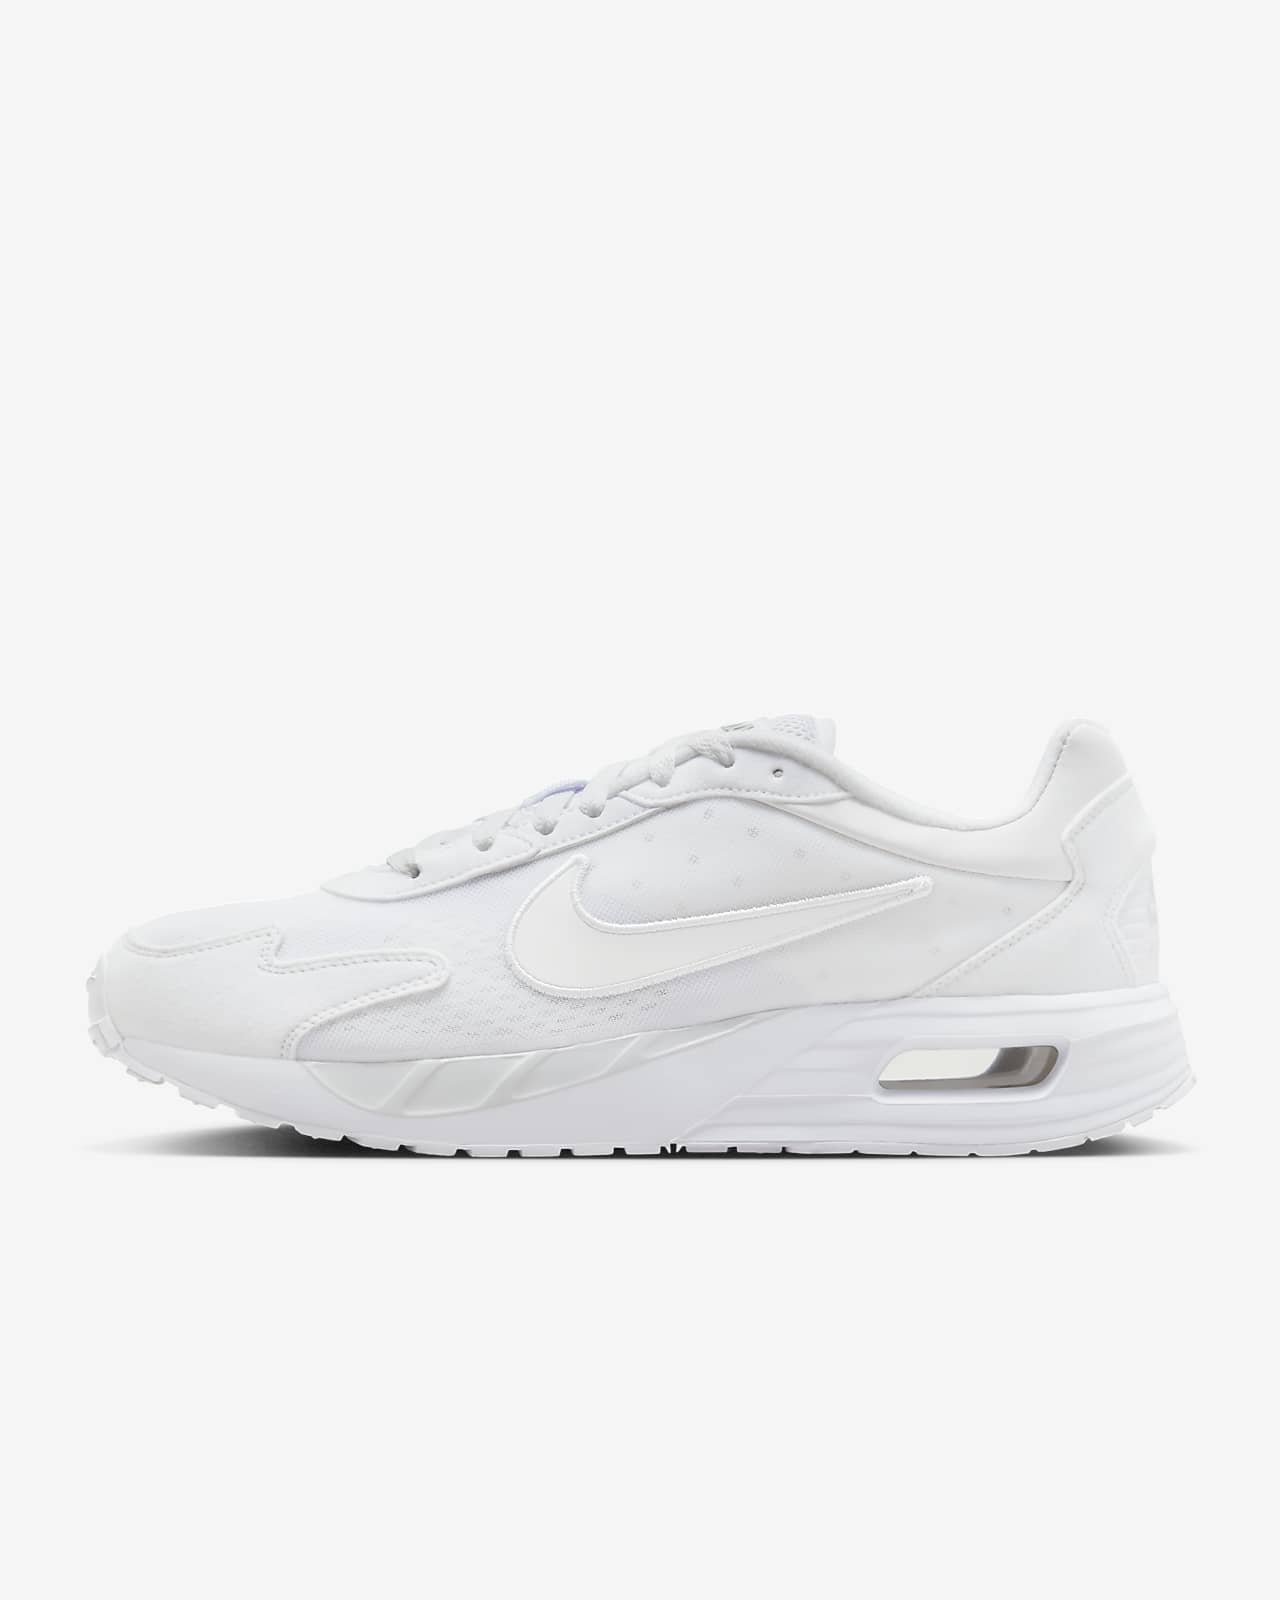 Chaussure Nike Air Max Solo pour homme